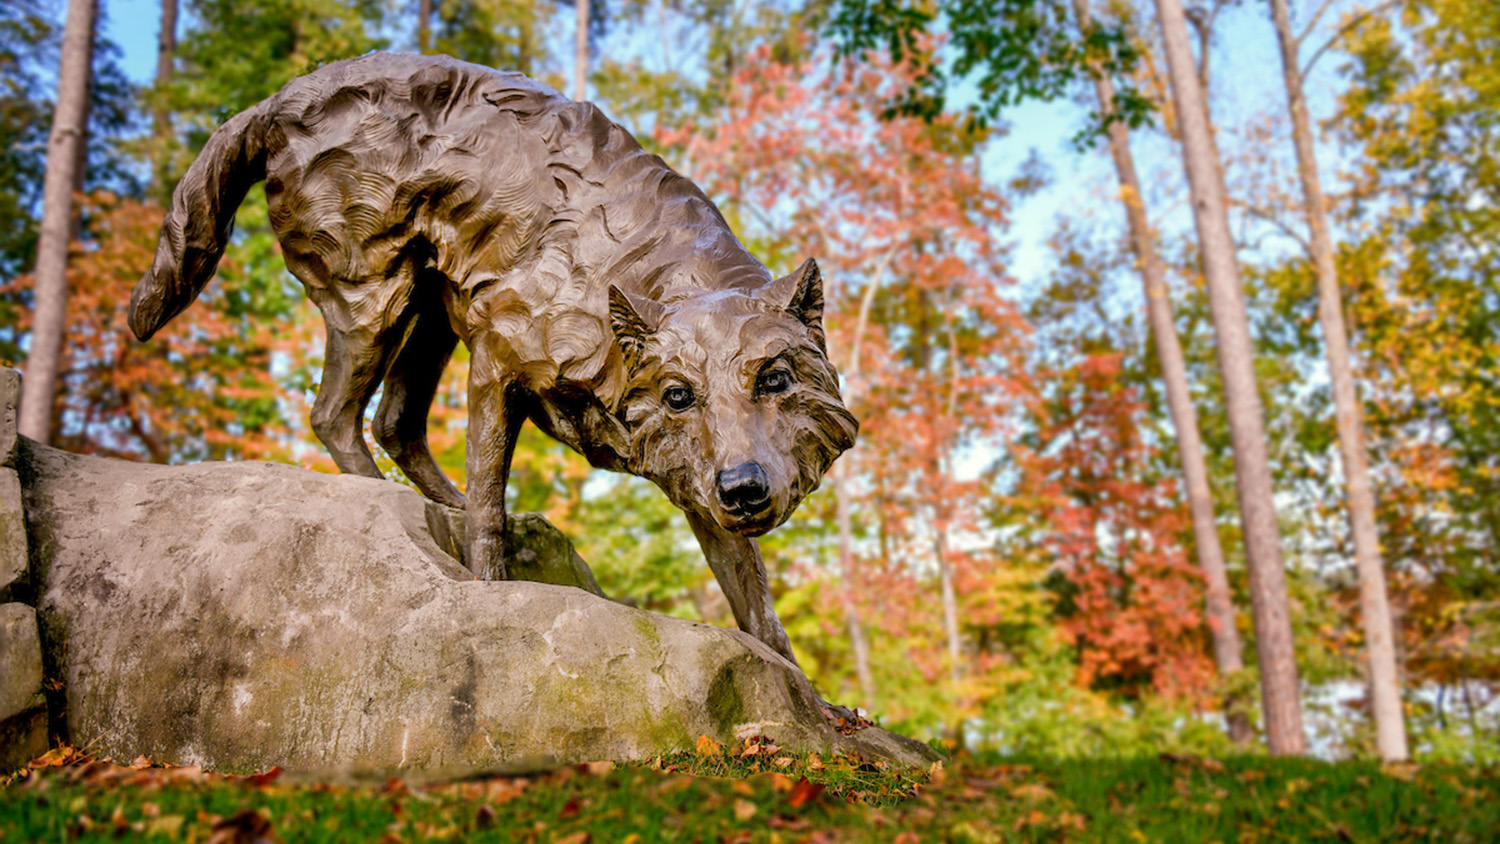 One of the wolf statues at the Park Alumni Center